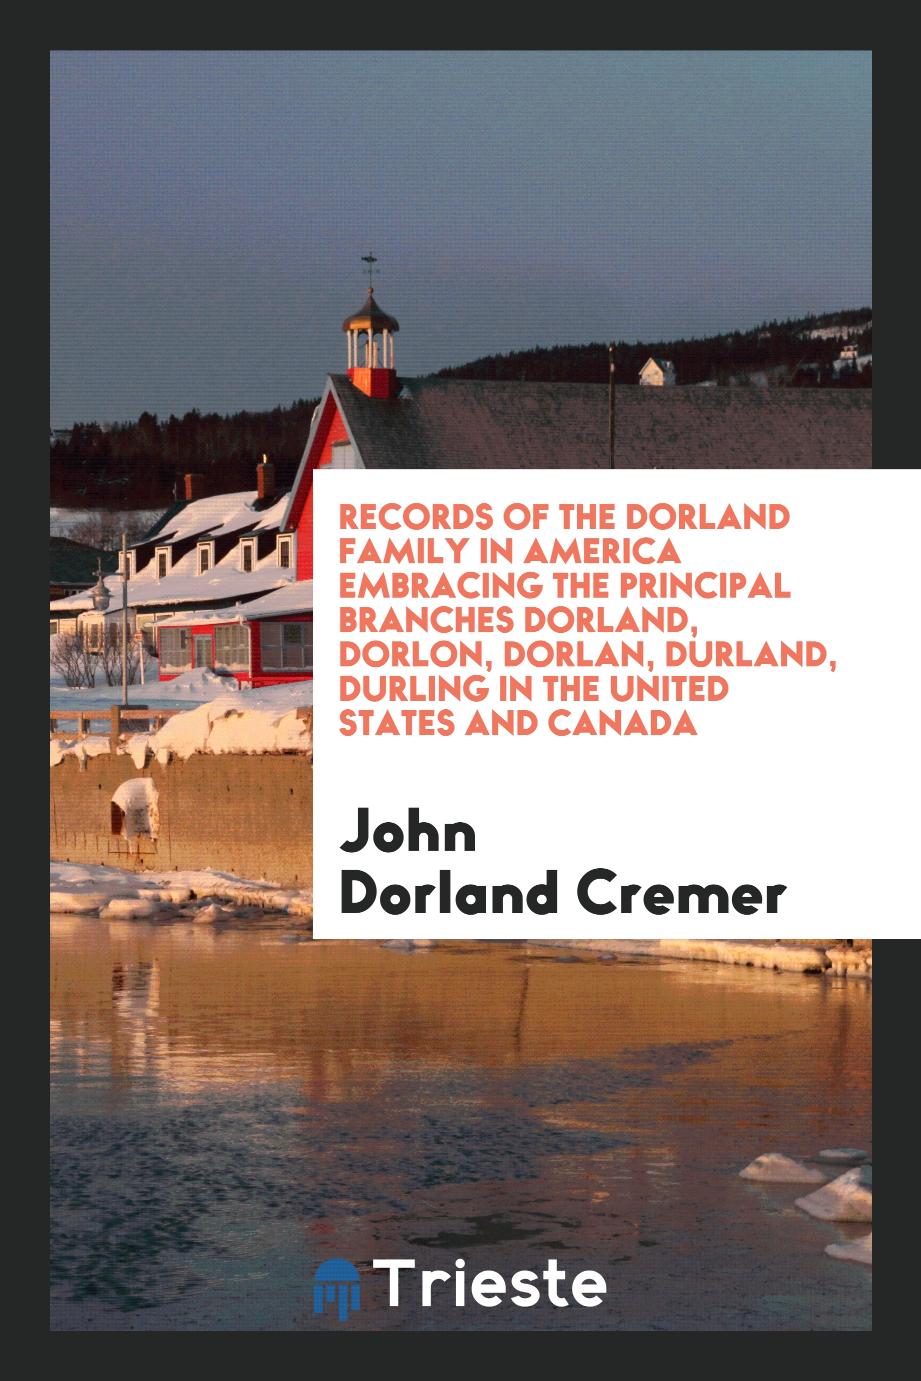 Records of the Dorland Family in America Embracing the Principal Branches Dorland, Dorlon, Dorlan, Durland, Durling in the United States and Canada